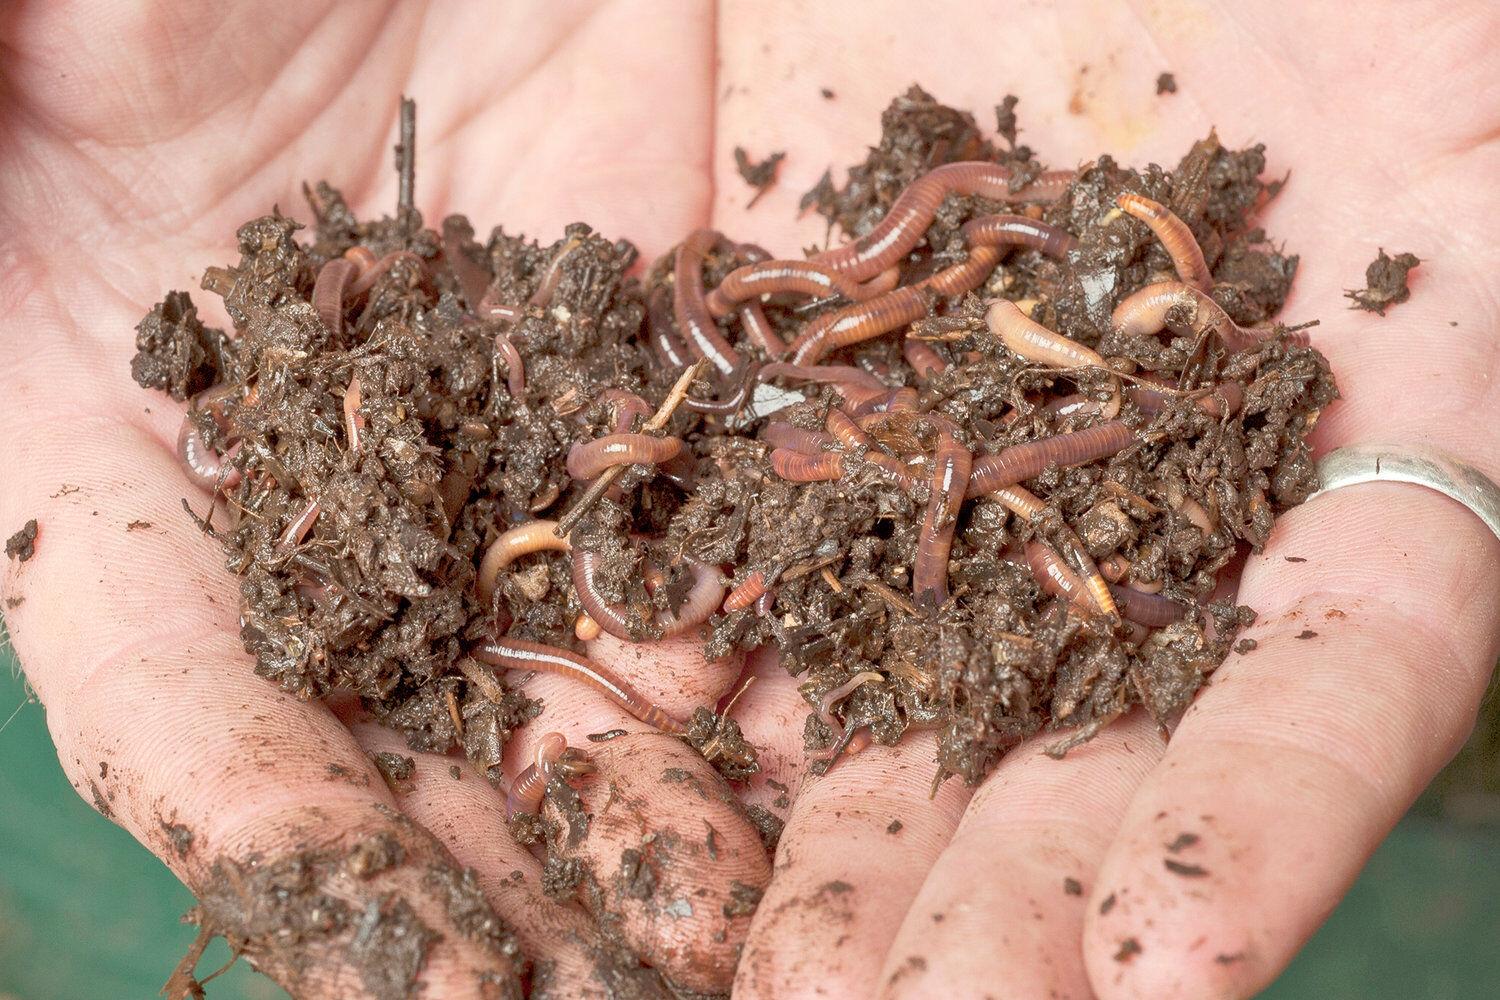 Invasive earthworms are eating away at forest diversity: U of T study